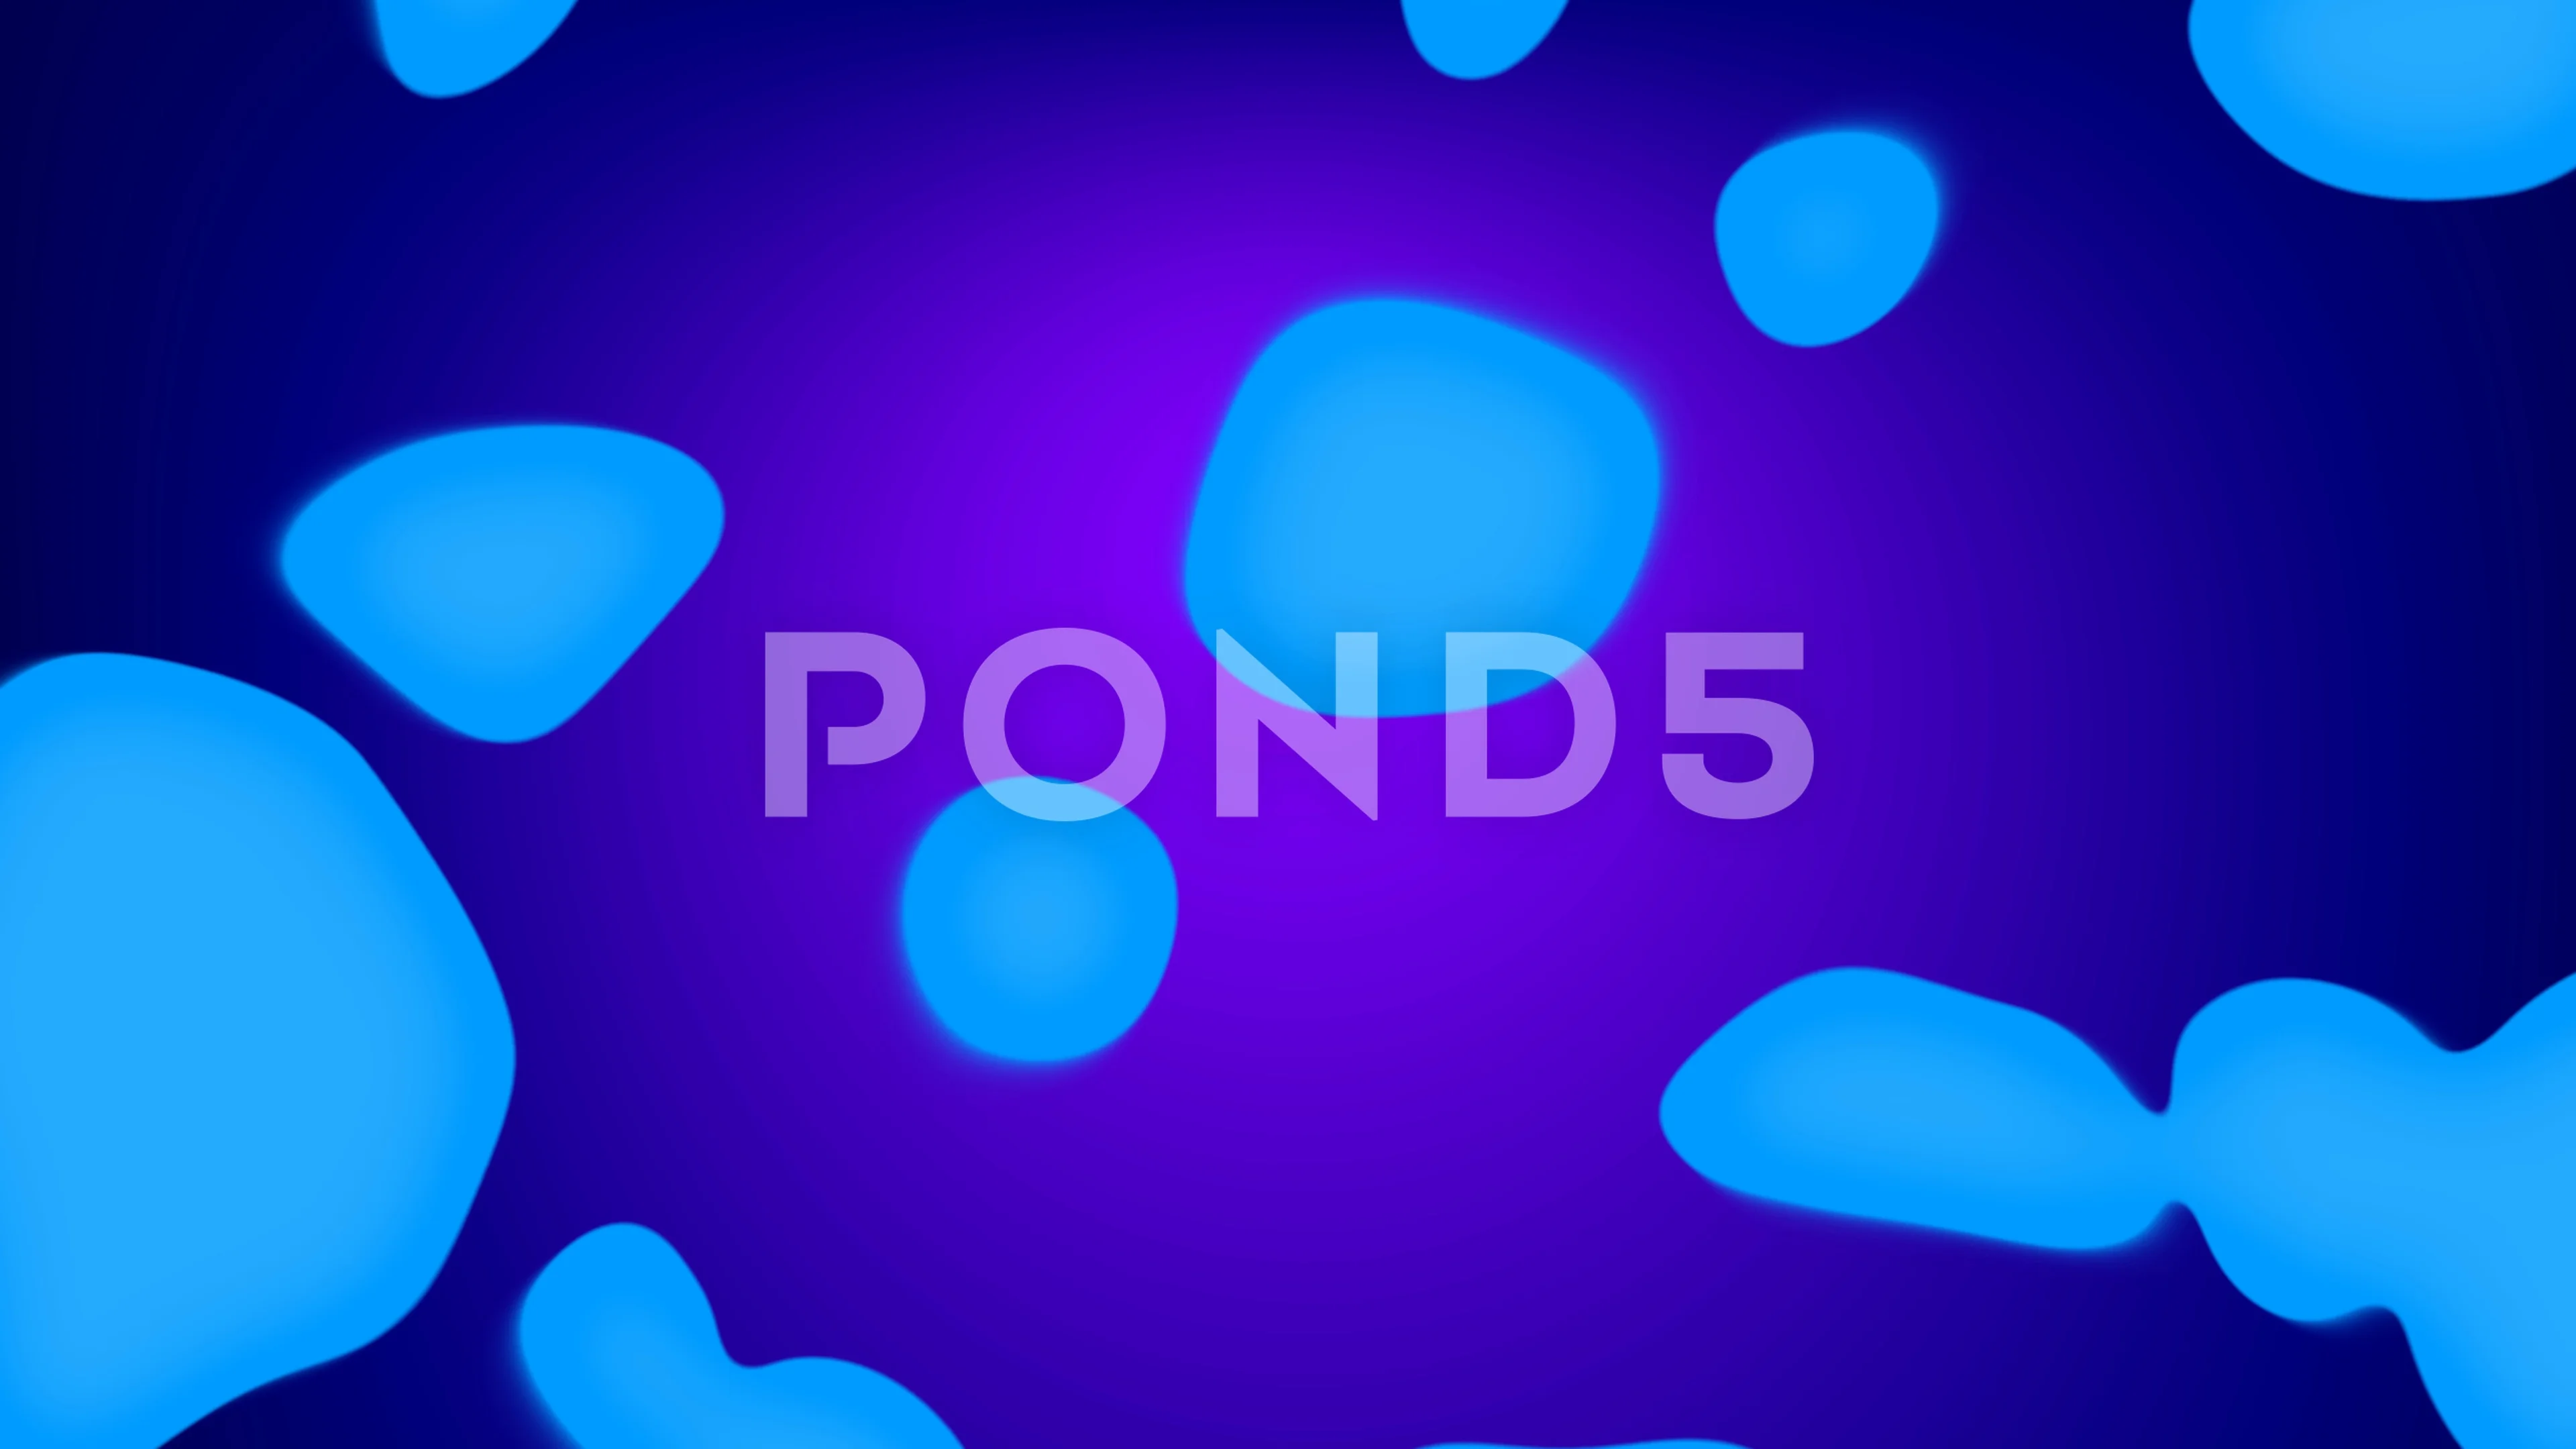 Lava Lamp Animation Blue and Purple | Stock Video | Pond5